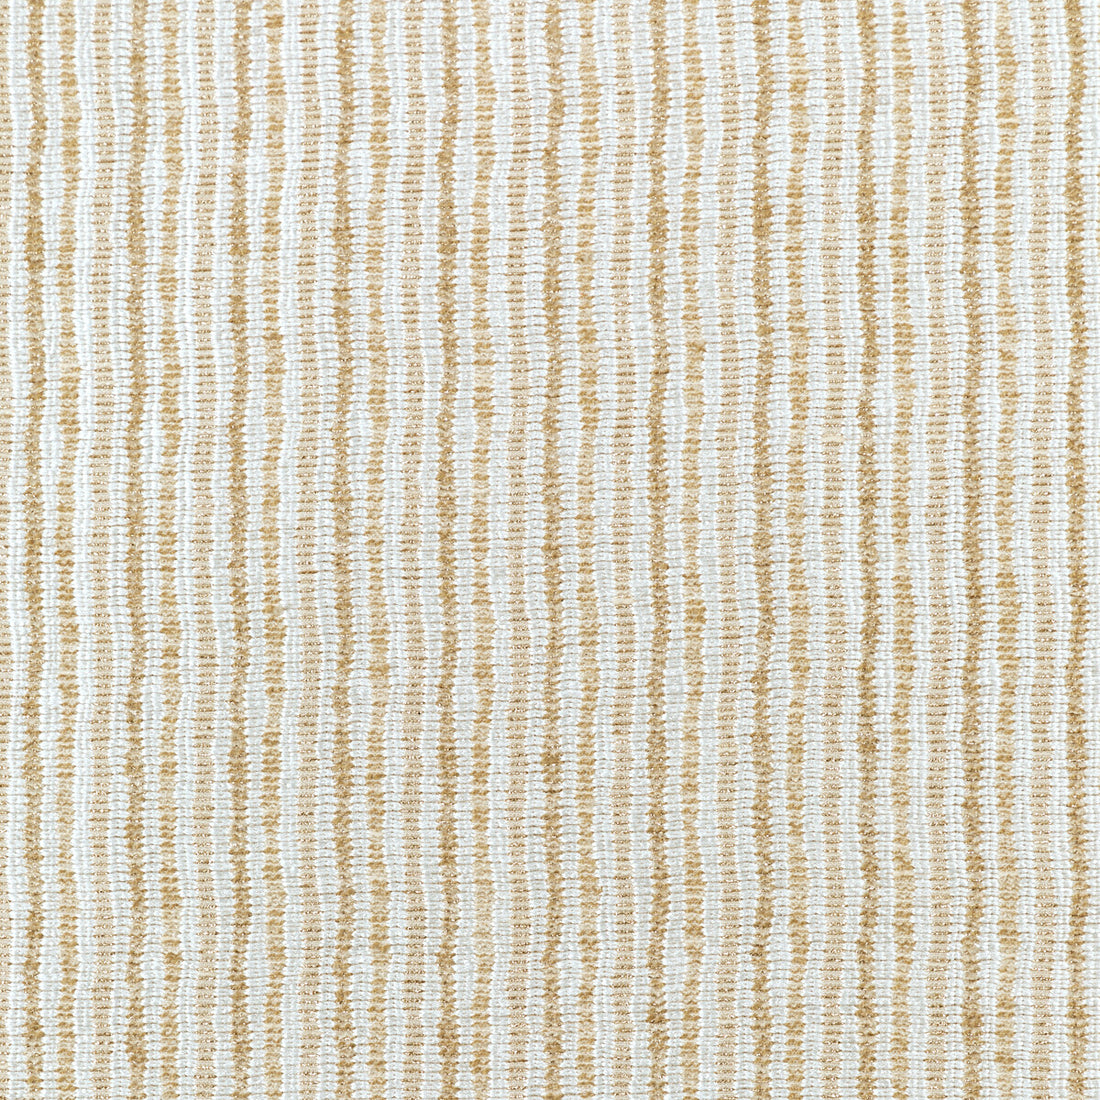 Verticalis fabric in champagne color - pattern 36337.16.0 - by Kravet Couture in the Modern Luxe III collection